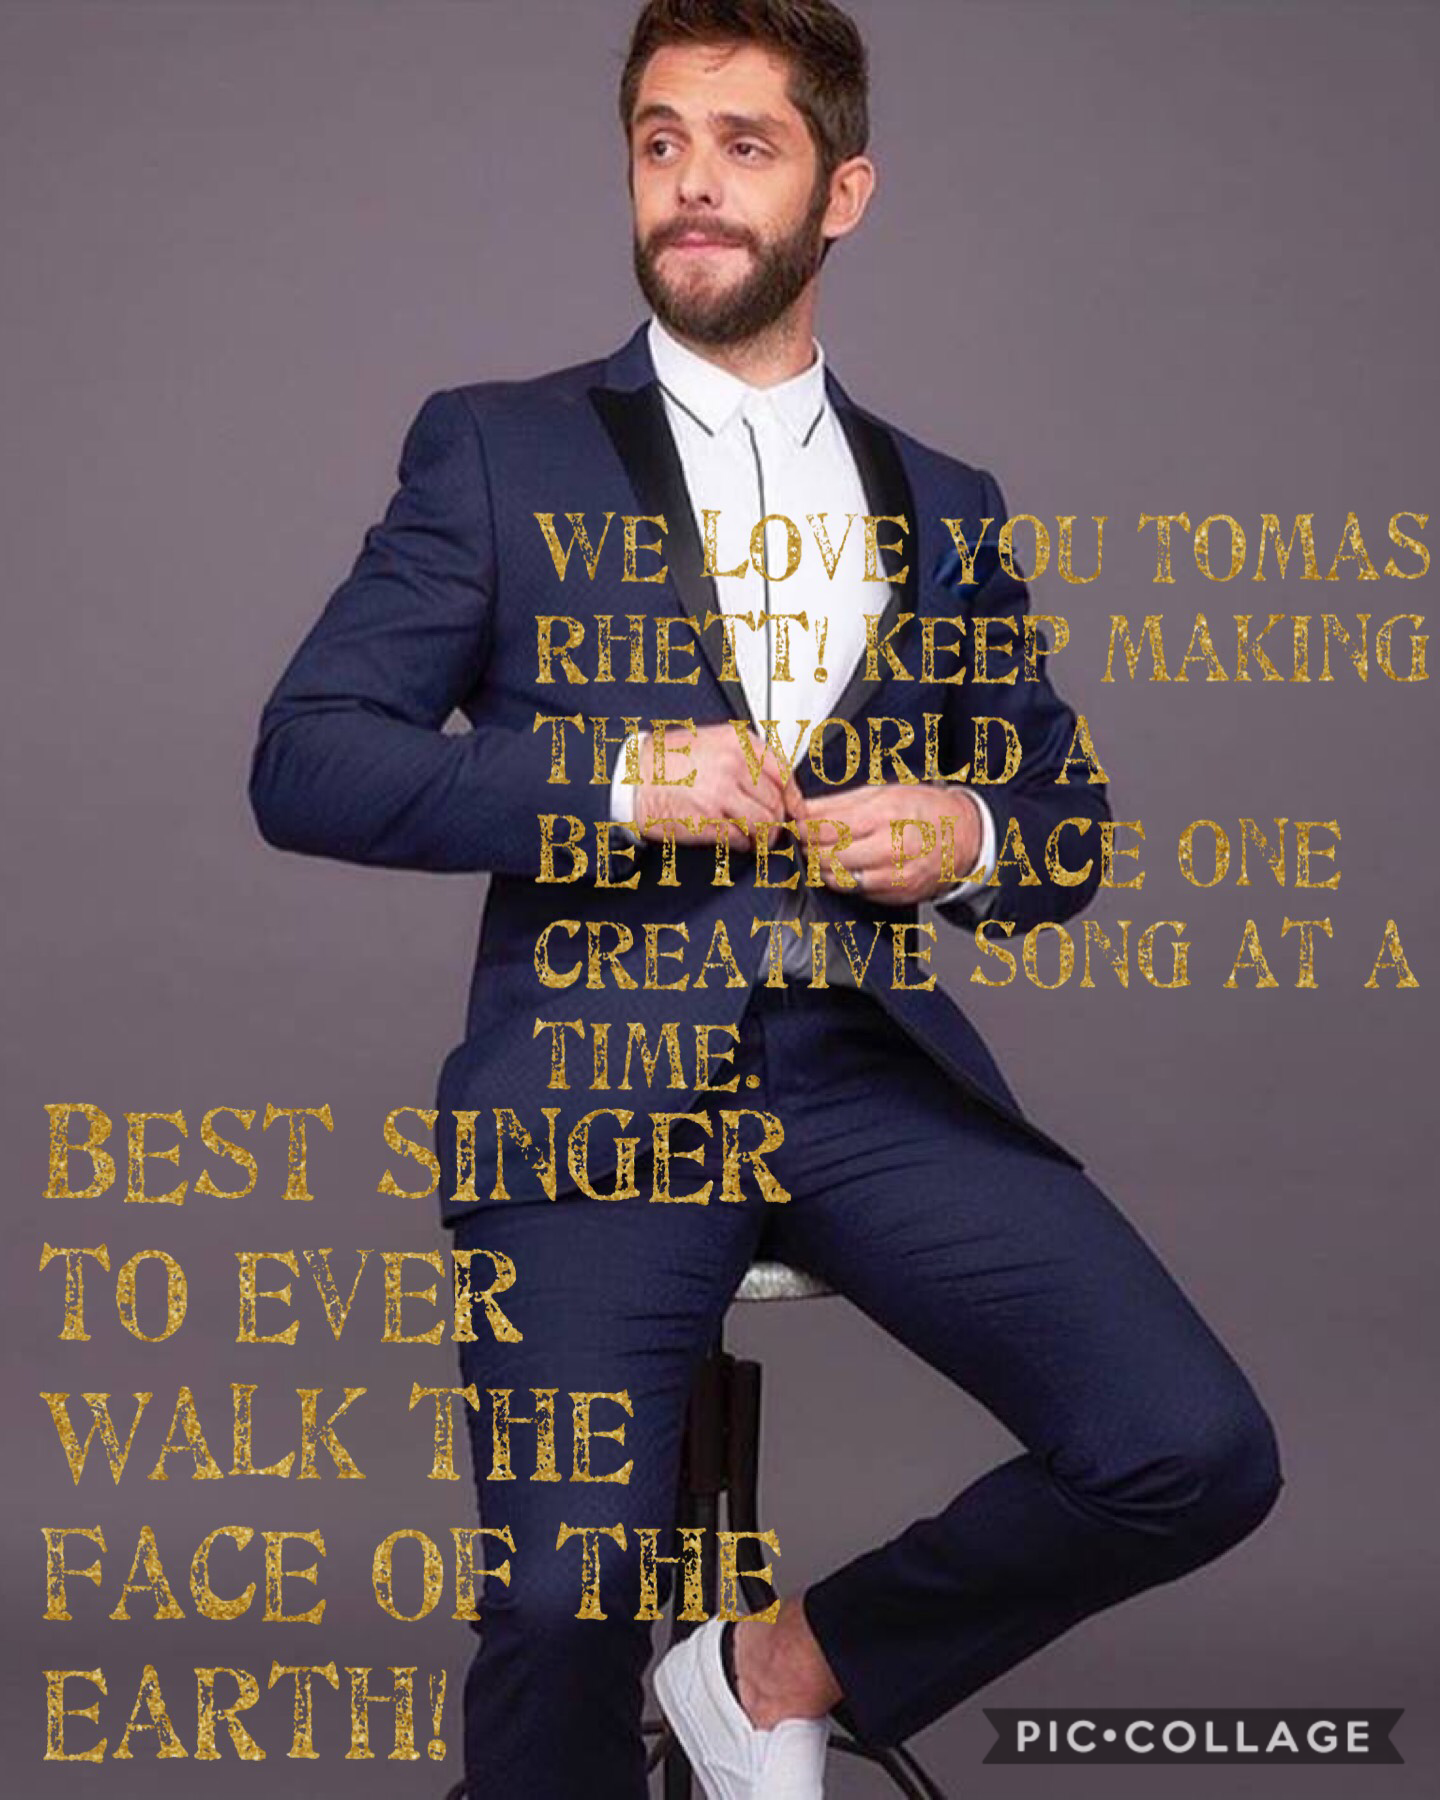 I have another account, but this is a fan page for all you Tomas Rhett lovers!